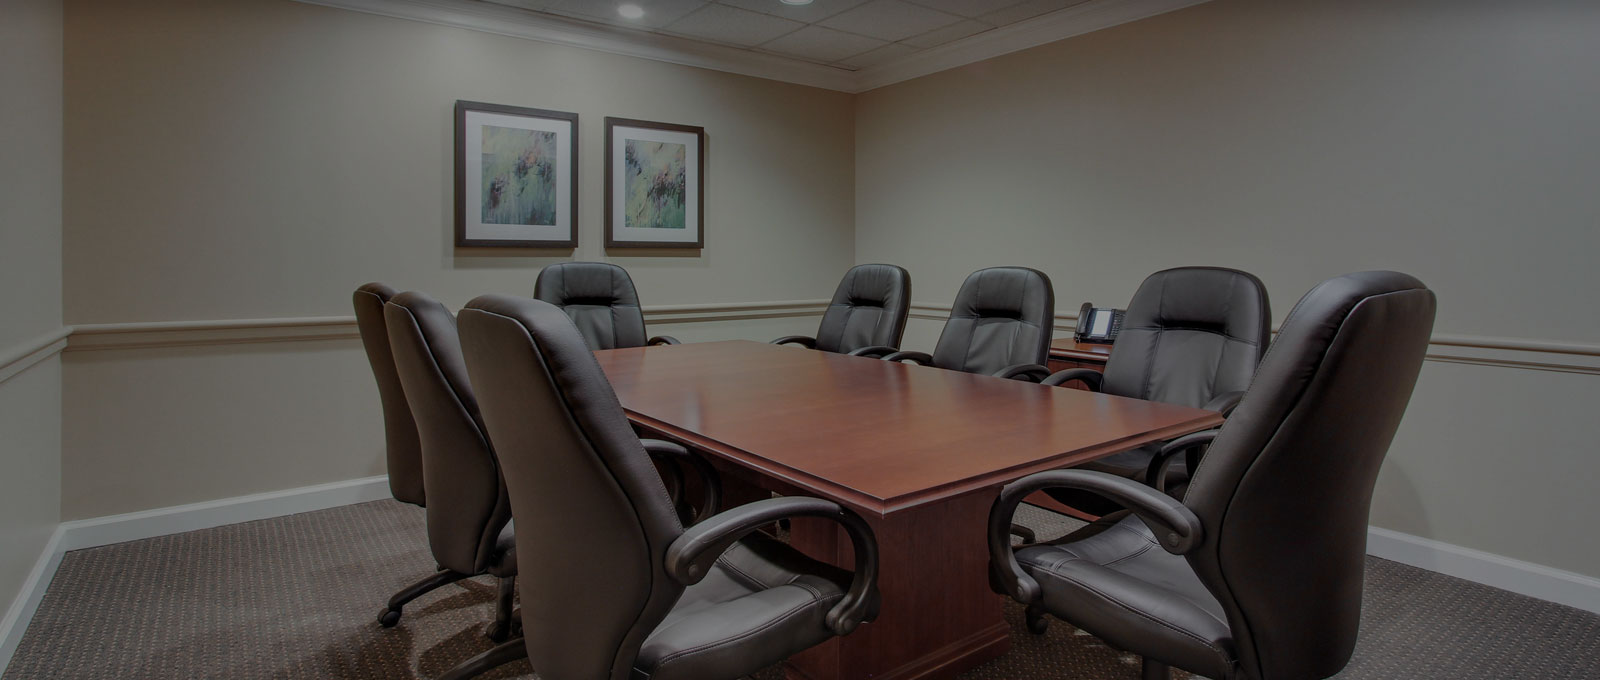 meeting rooms brentwood tn